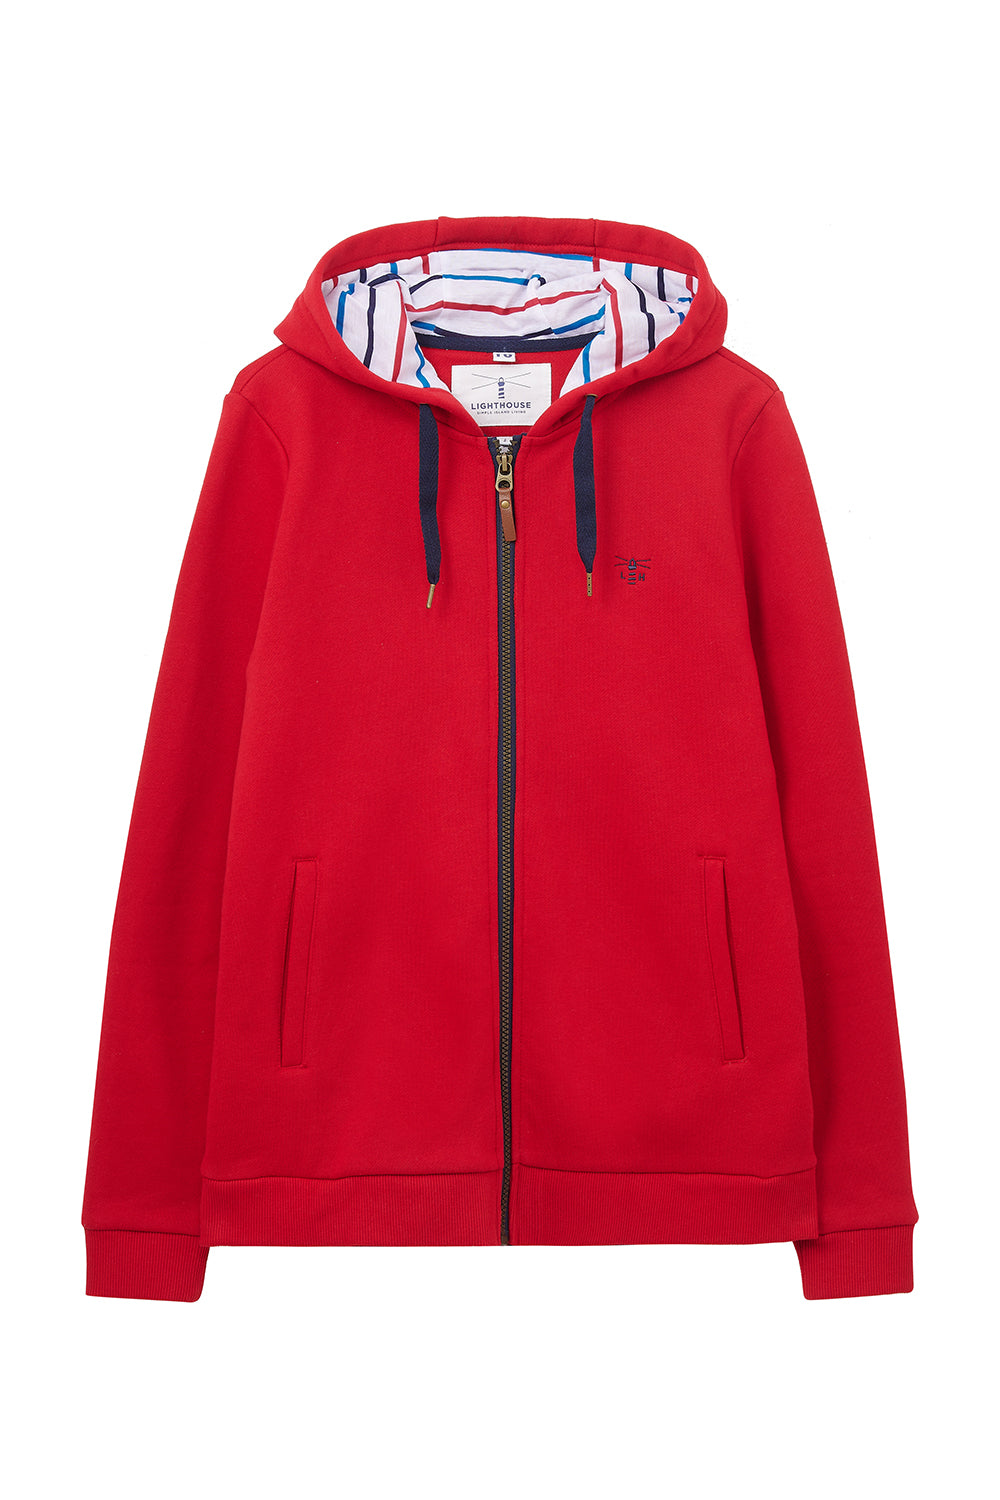 Lighthouse Ladies Strand Womens Hooded Jacket -Red